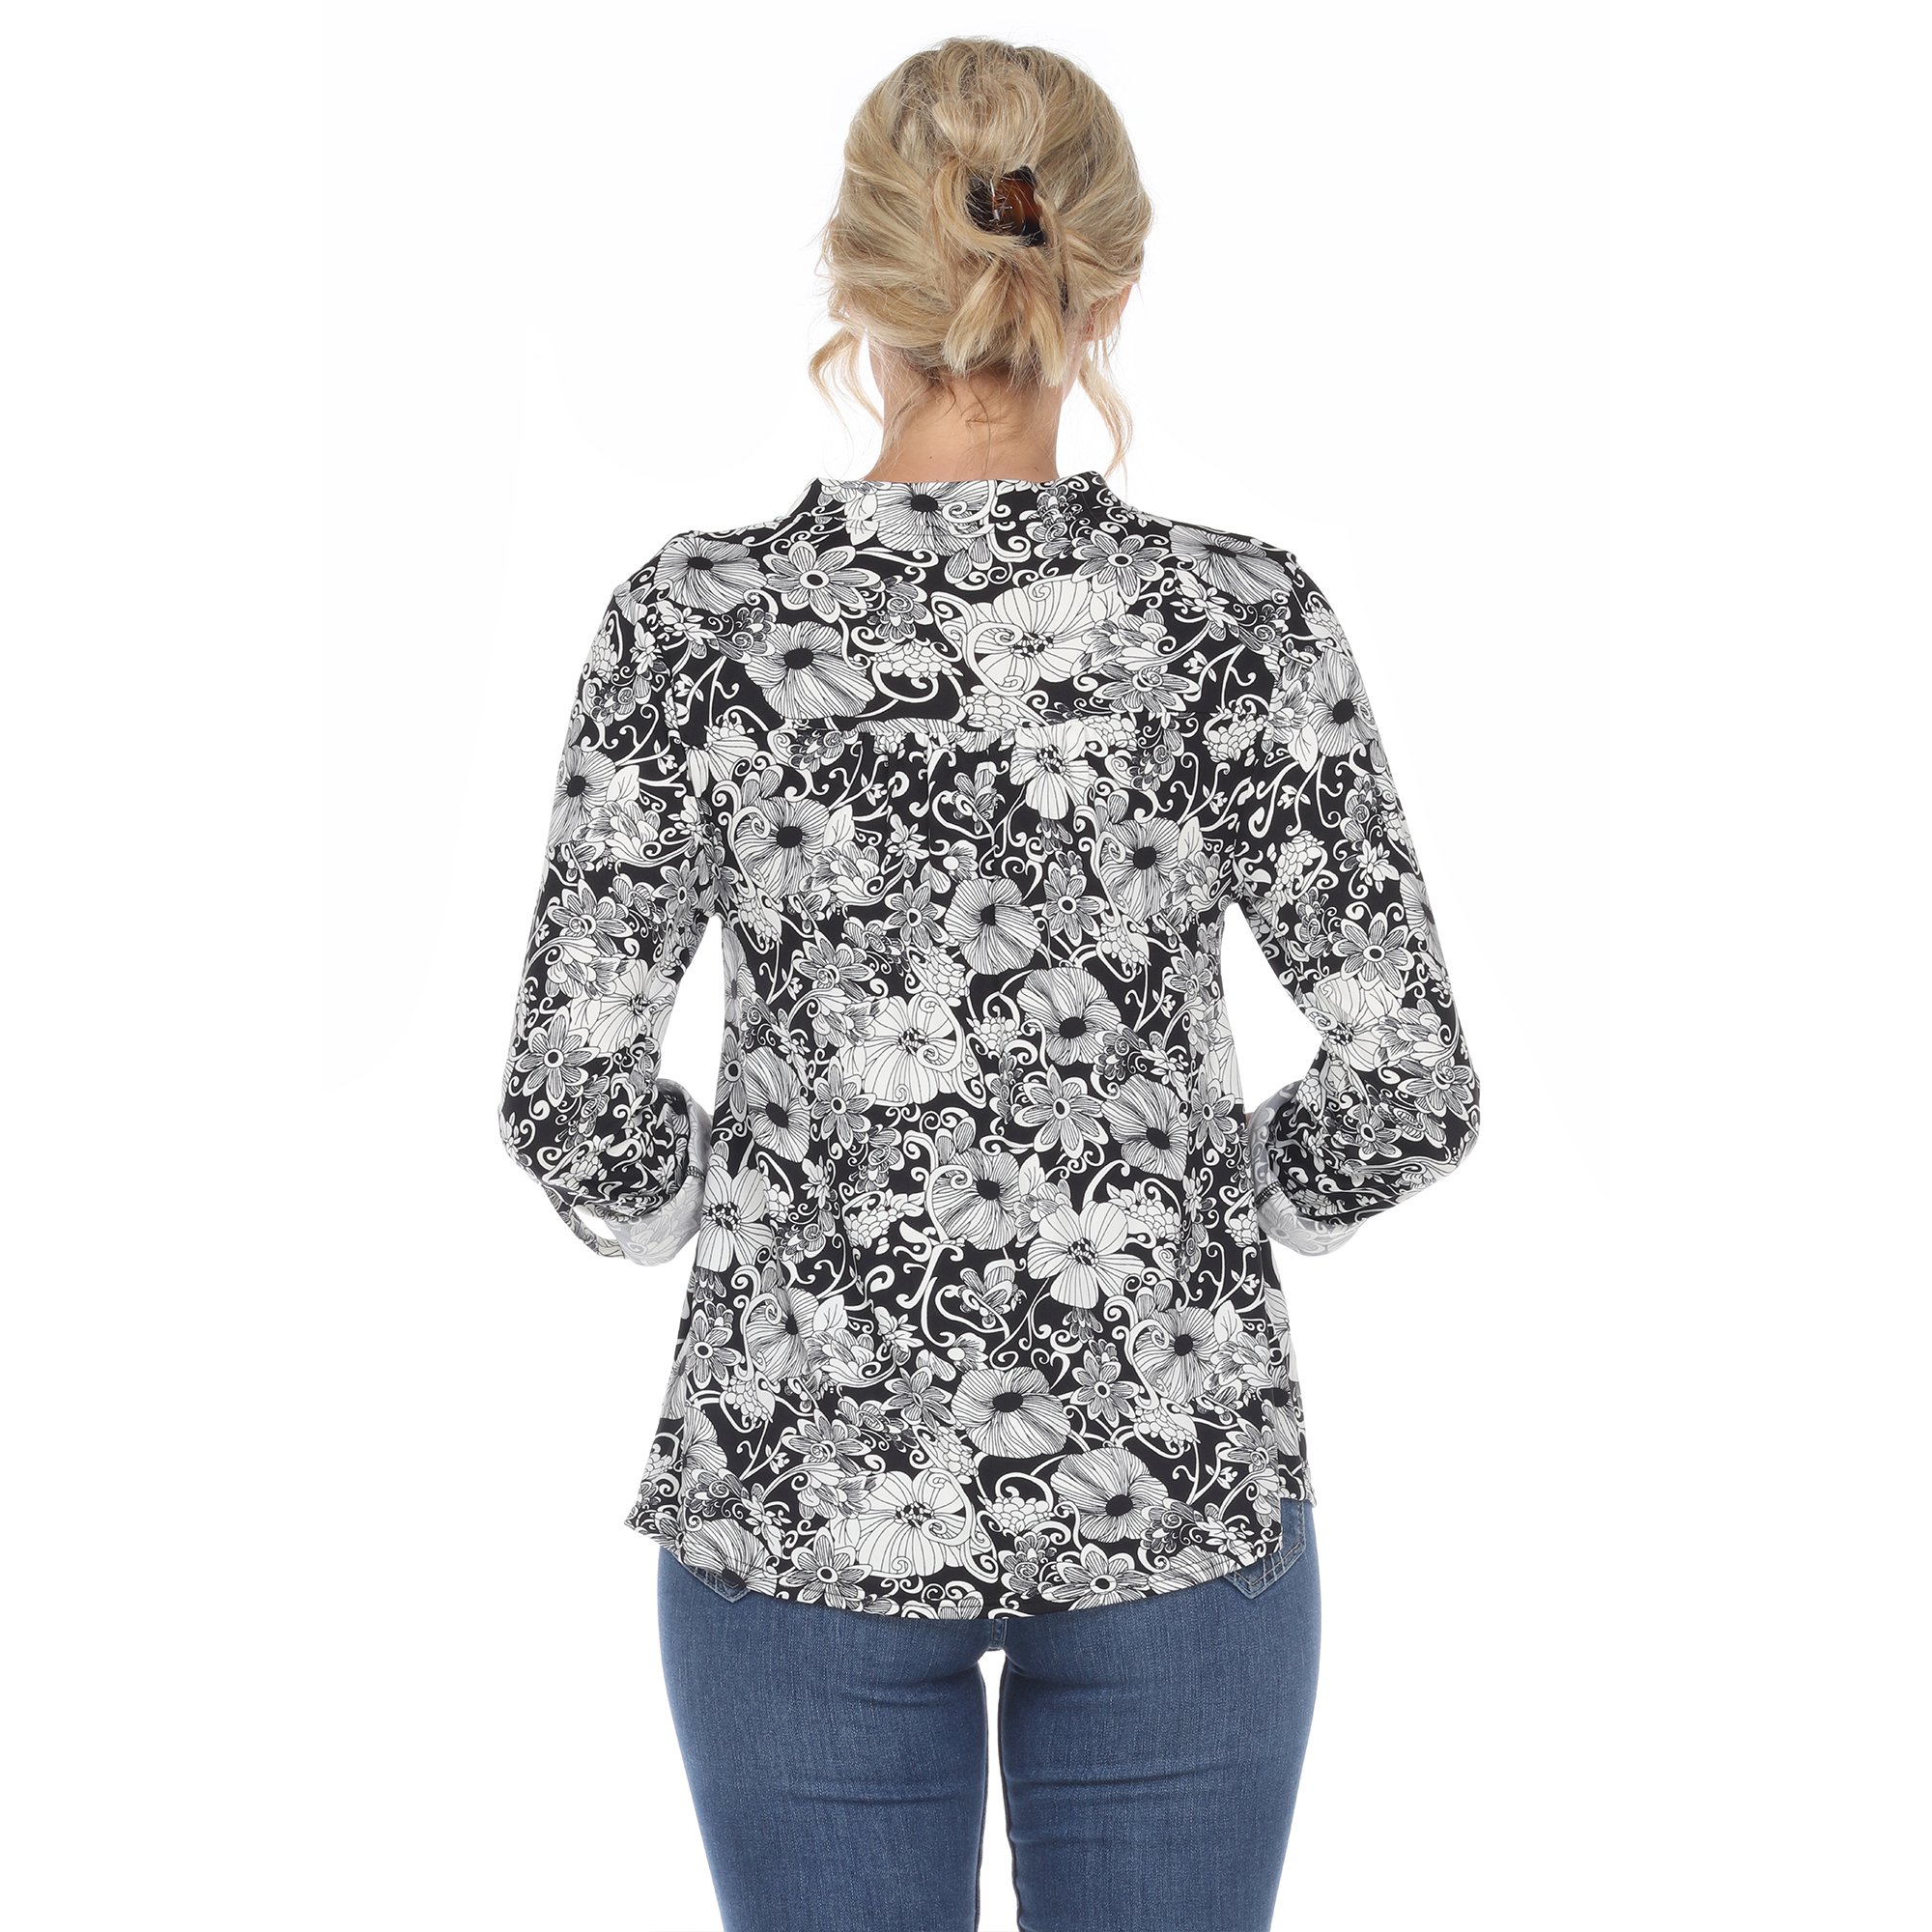 White Mark Women's Pleated Long Sleeve Floral Print Blouse - Mint, X-Large